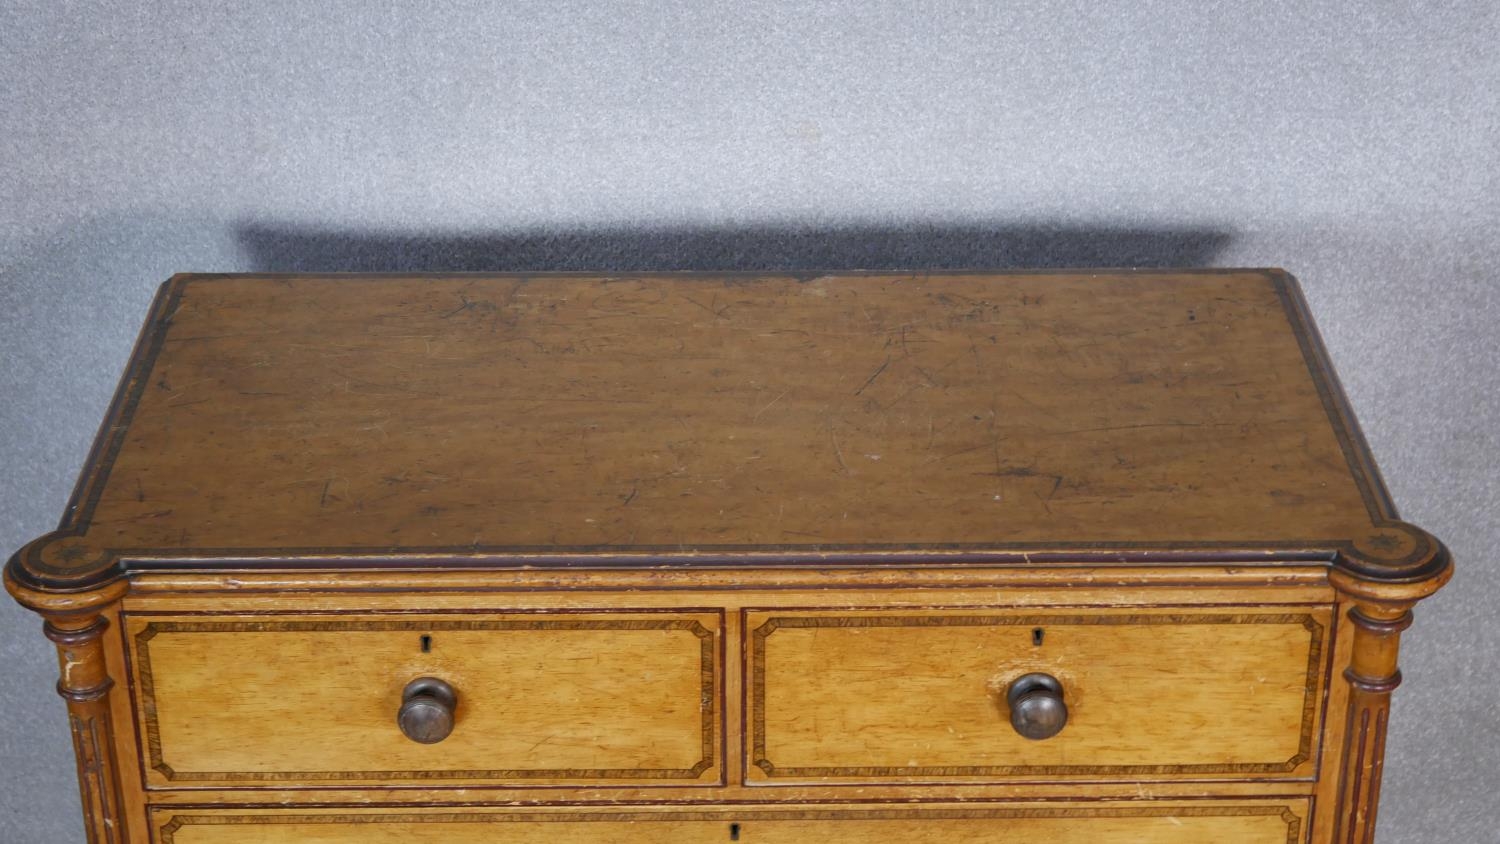 A late Victorian Aesthetic movement pitch pine chest of drawers with painted and ebonised decoration - Image 8 of 8